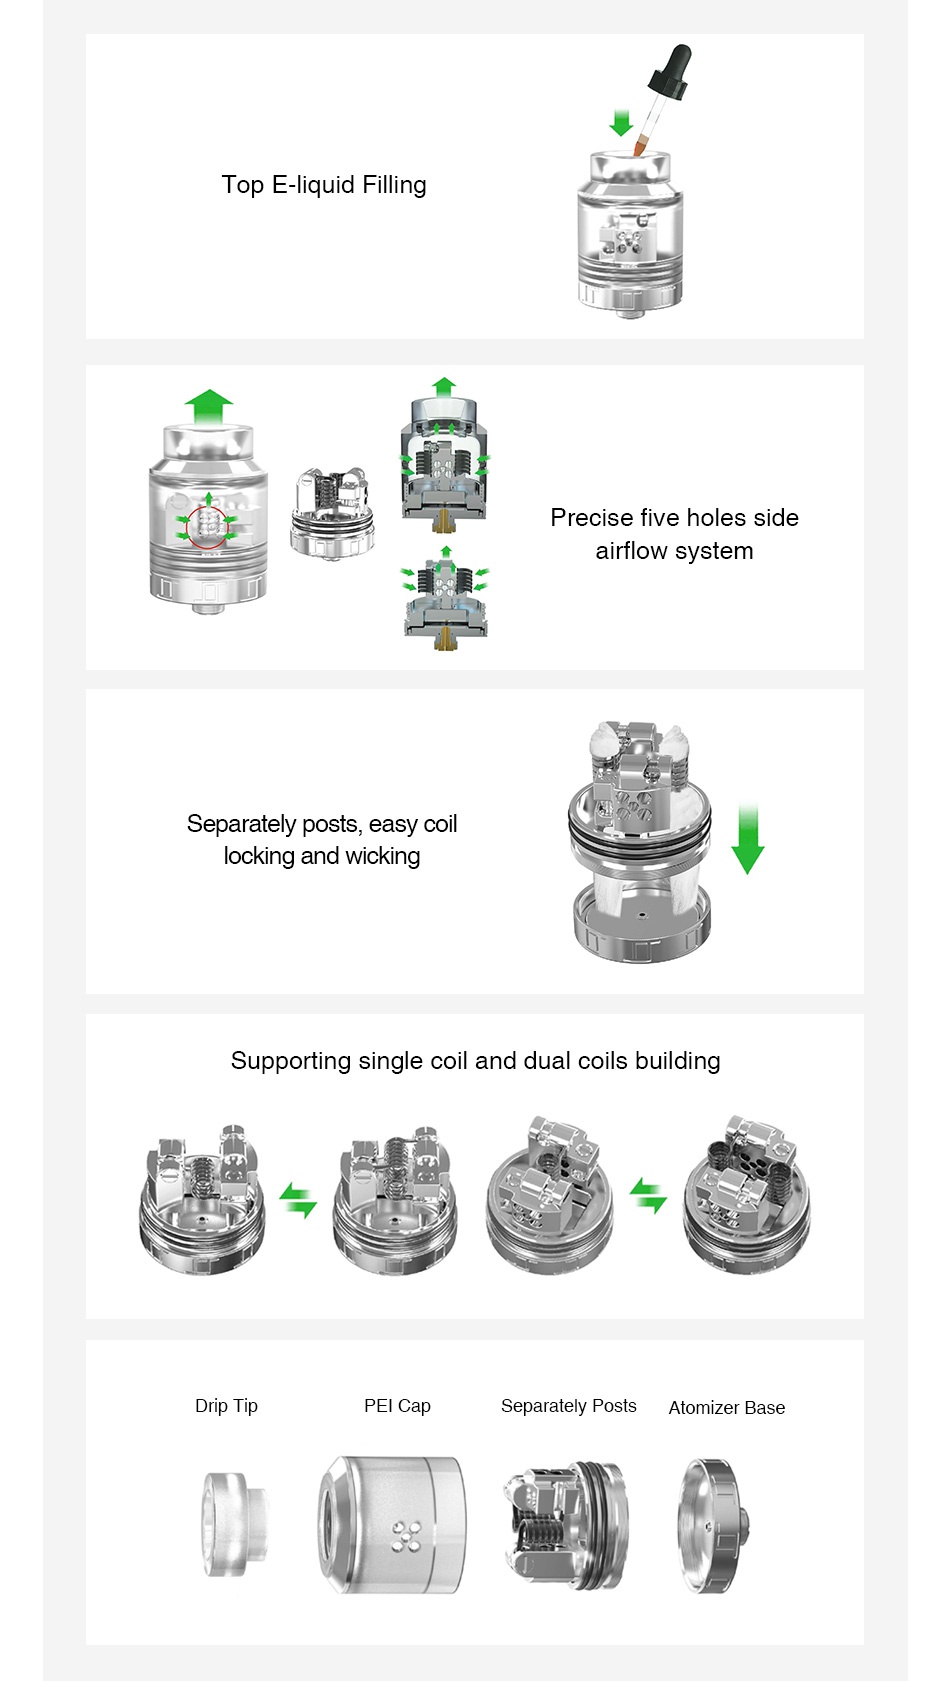 OUMIER VLS RDA Top E liquid Filling Precise five holes side airflow system   Separately posts  easy coil locking and wicking Supporting single coil and dual coils building Drip T ip El Cap Separately Posts Atomizer Base